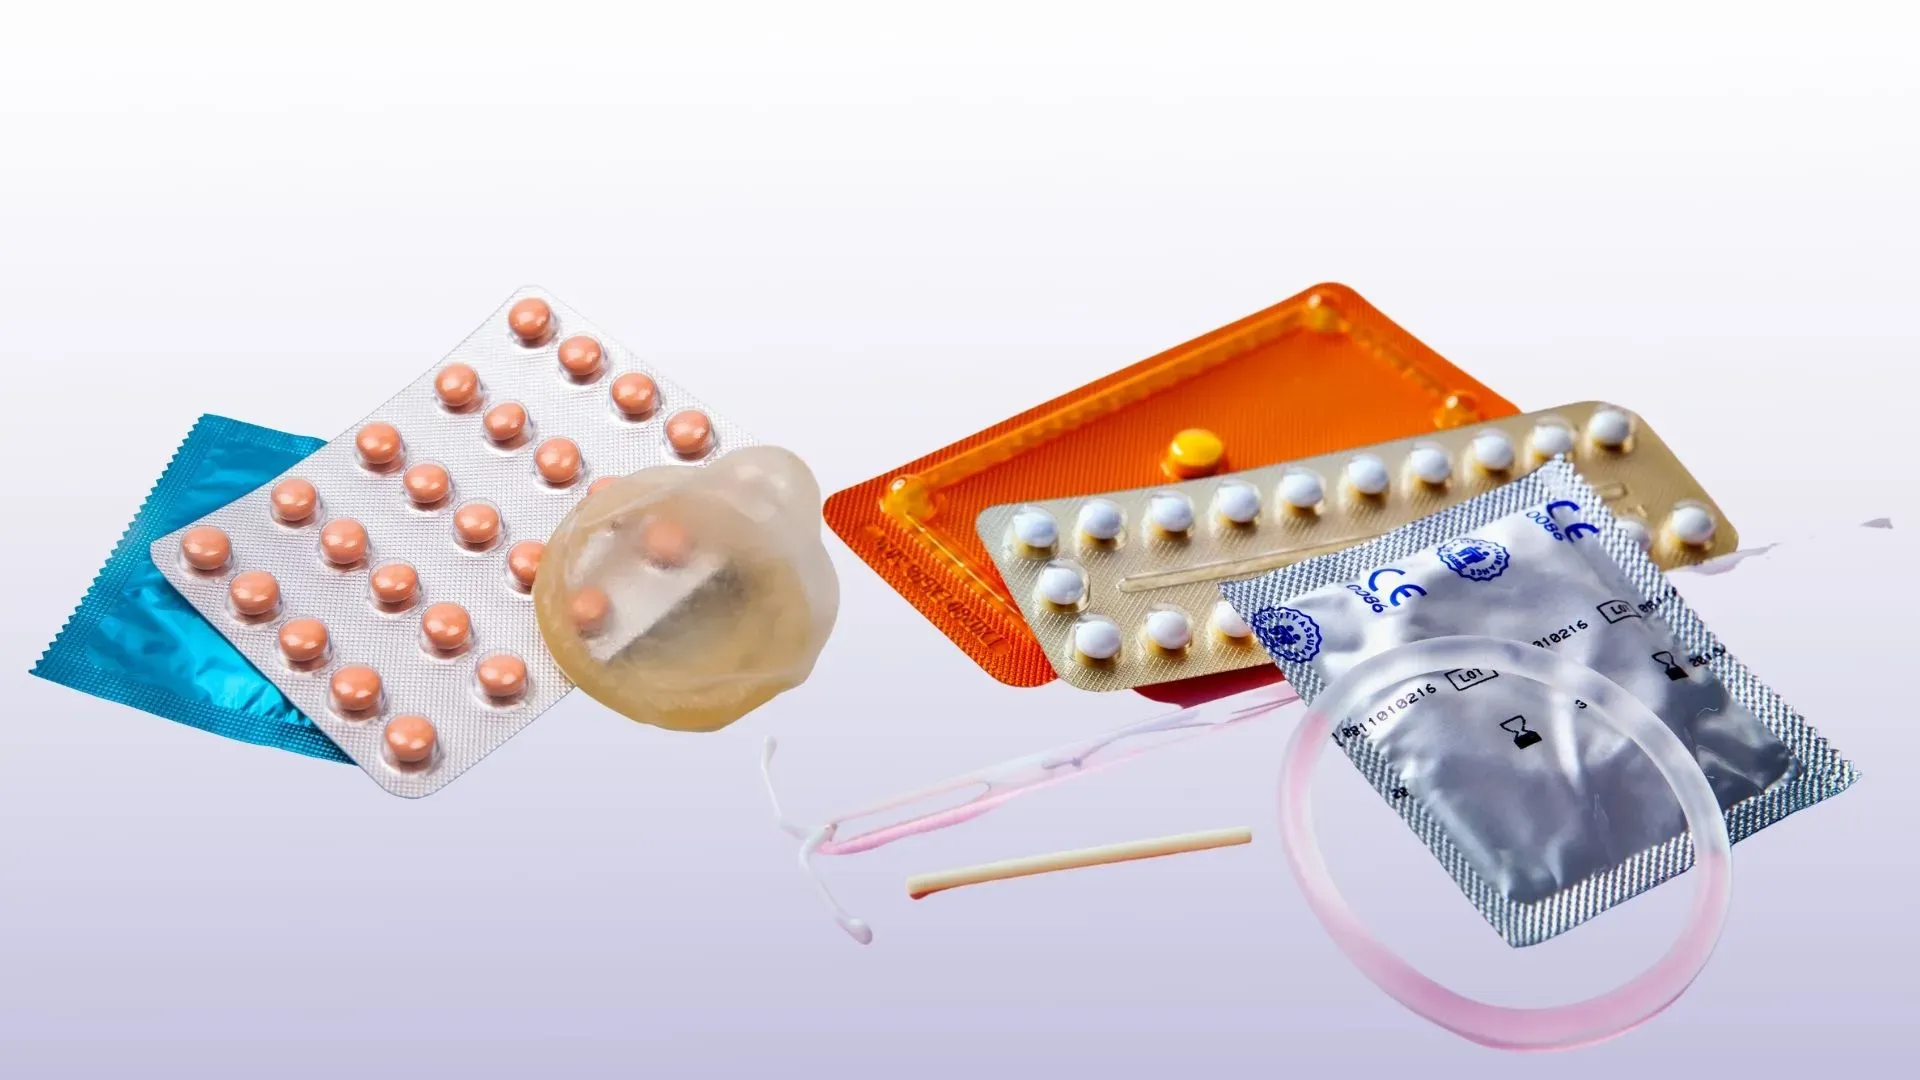 many contraceptive devices kept in a lump